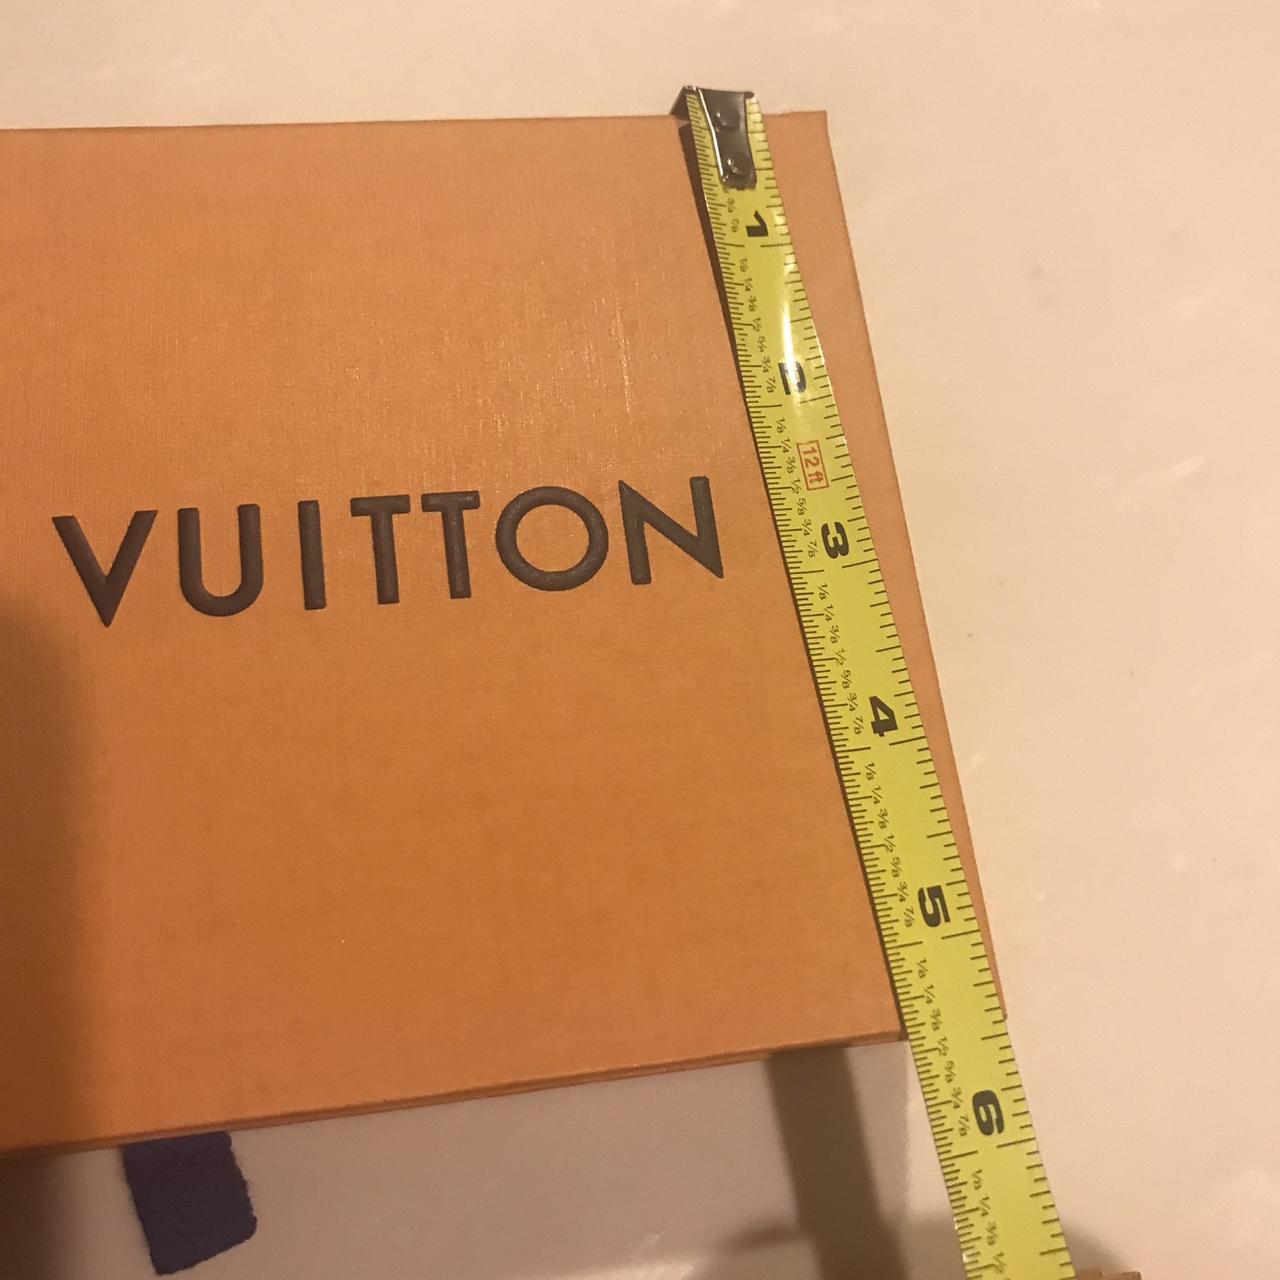 Louis Vuitton box with bag never been used authentic - Depop